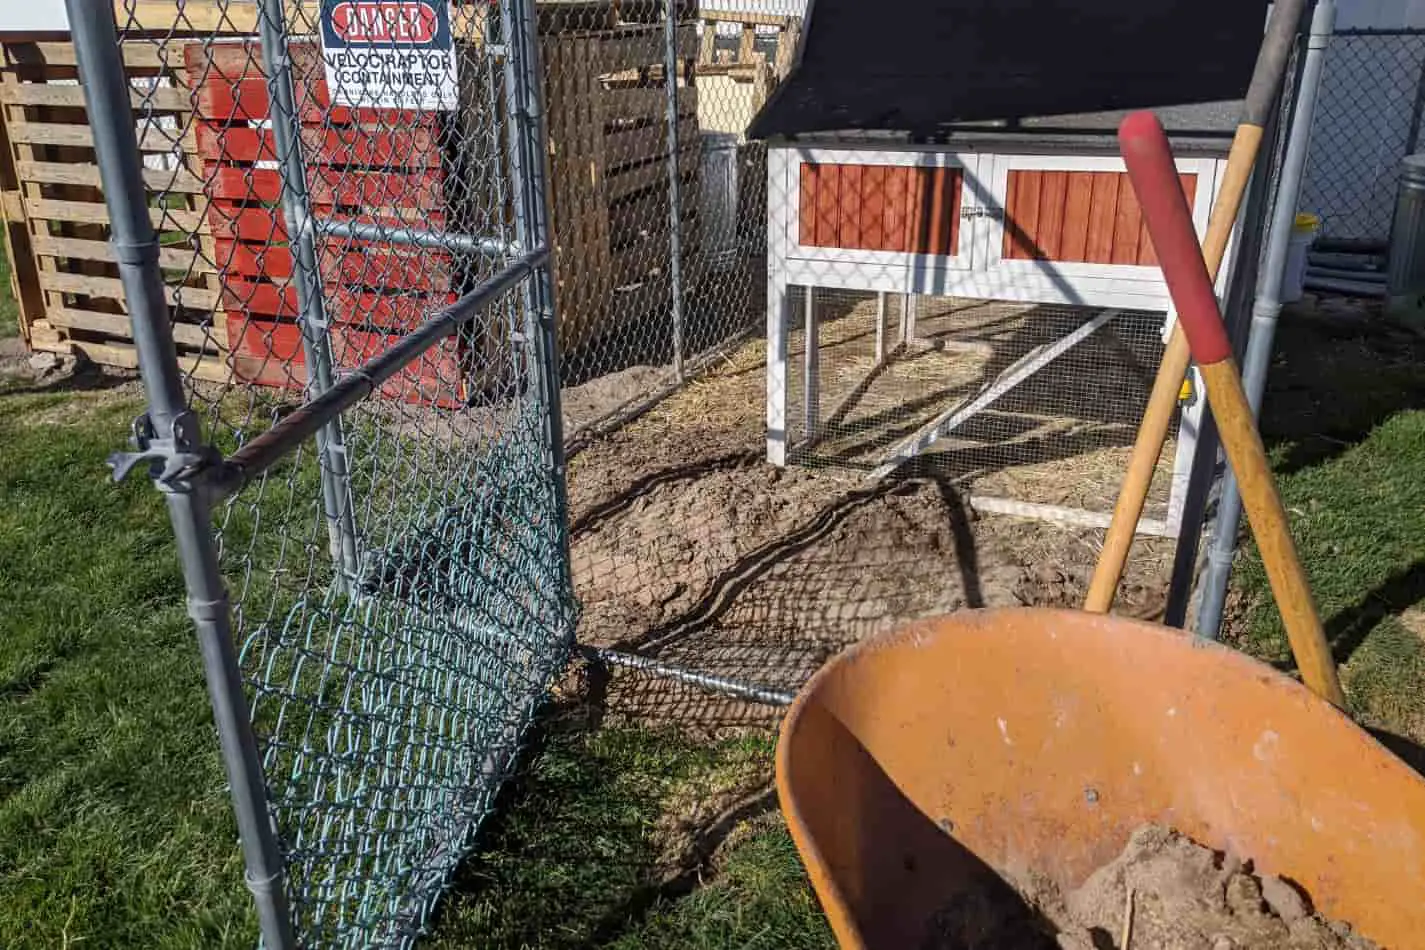 An image of the Starr family's chicken coop and chain link run with the door open and a wheelbarrow full of dirt next to it. A pallet wood animal shelter for goats is next to it.